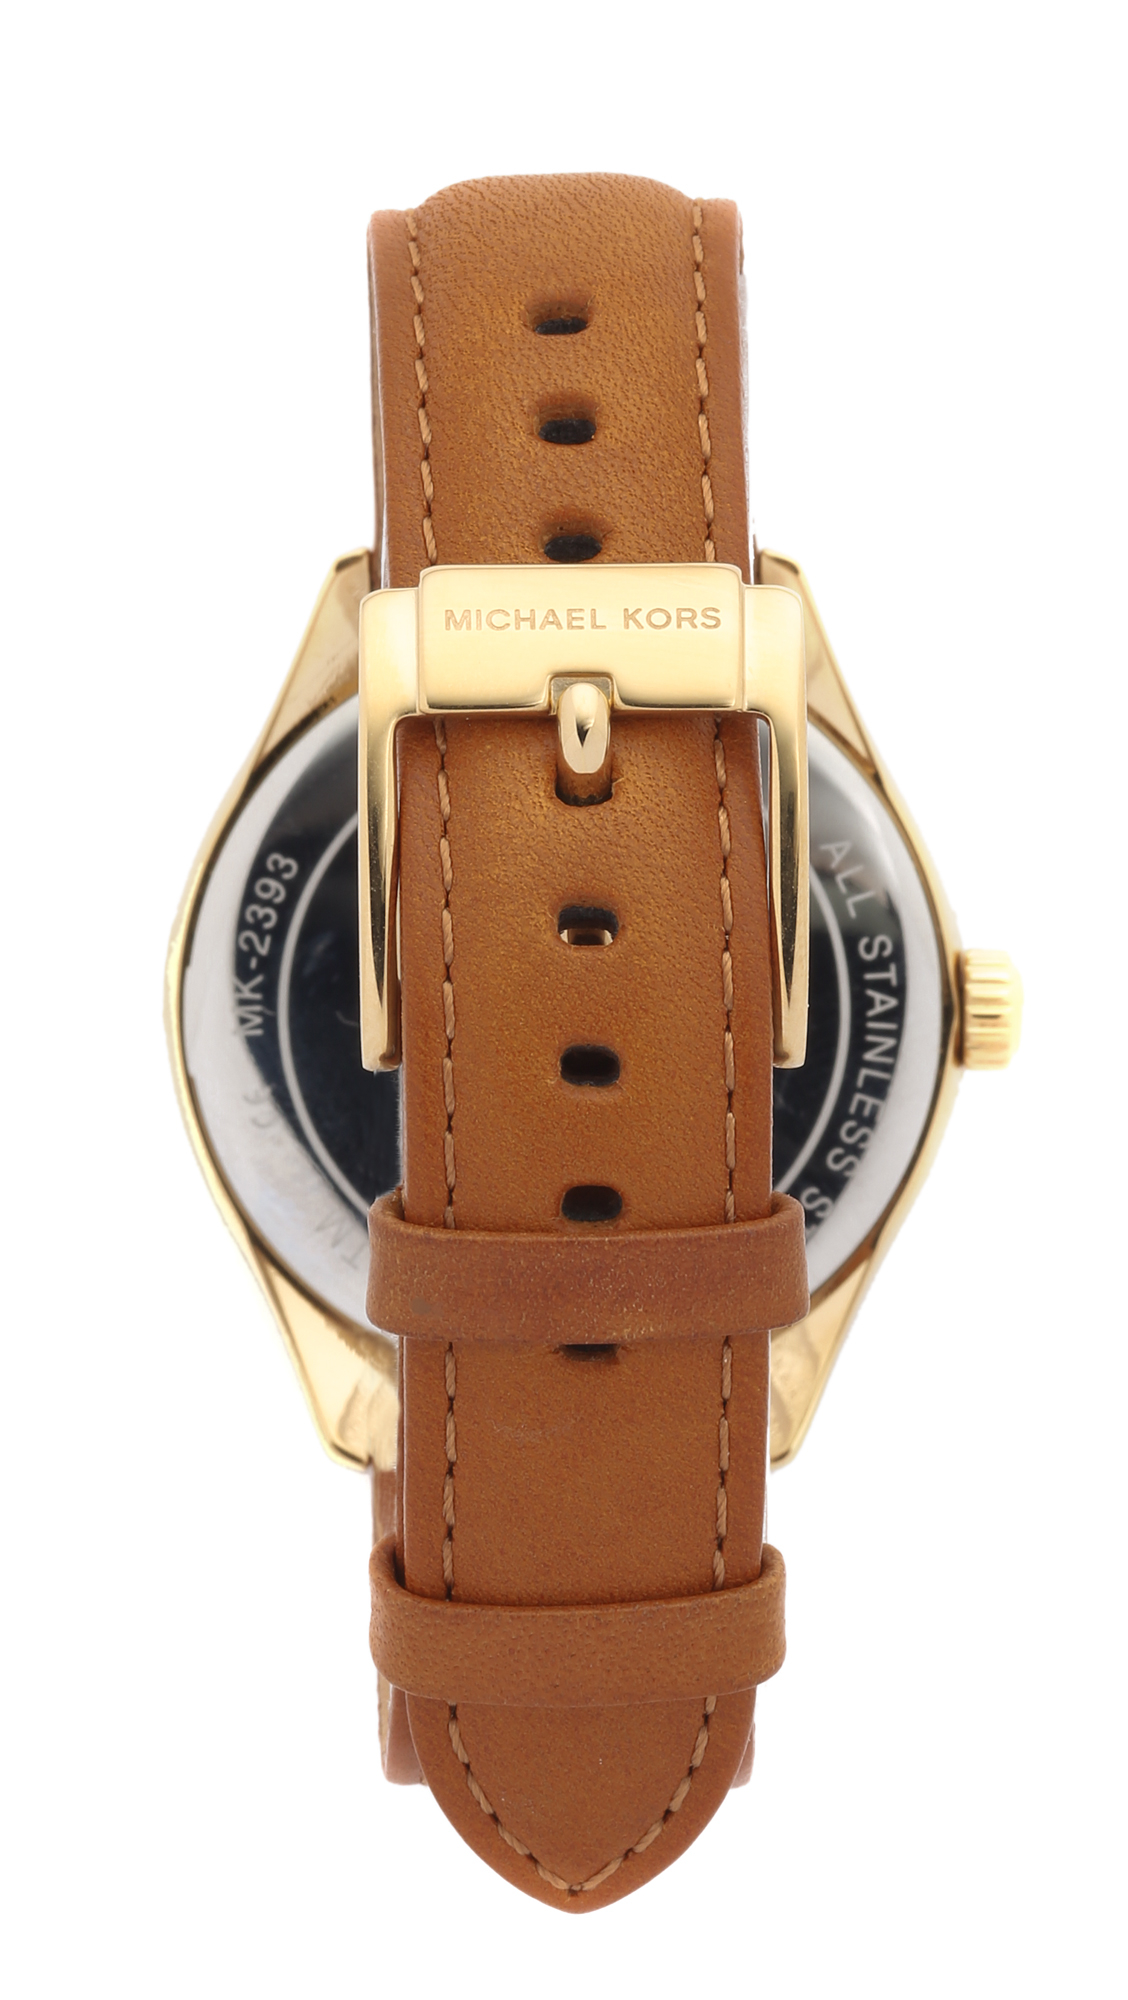 Michael Kors Amelia Moon Phase Watch - Gold/Brown | Lyst